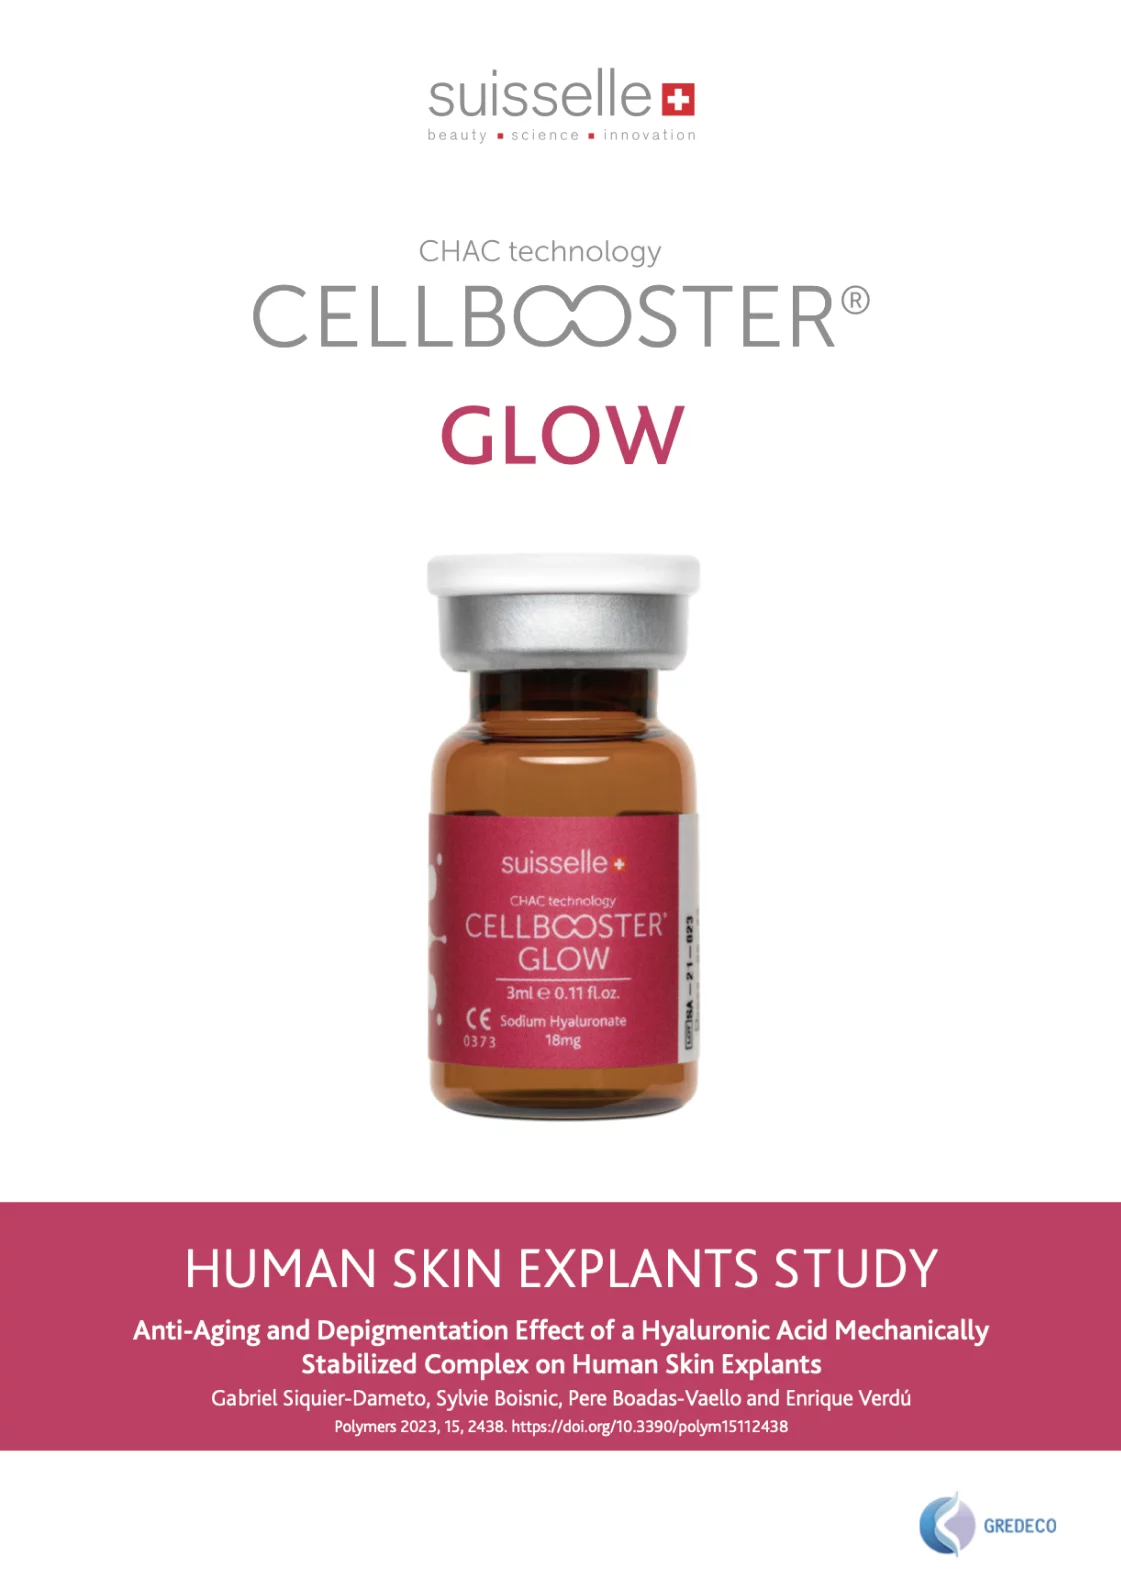 CELLBOOSTER® GLOW: Anti-aging and depigmentation effect of a hyaluronic acid mechanically stabilized complex on human skin explants. Study by Gabriel Siquier-Dameto, Sylvie Boisnic, Pere Boadas-Vaello and Enrique Verdú.